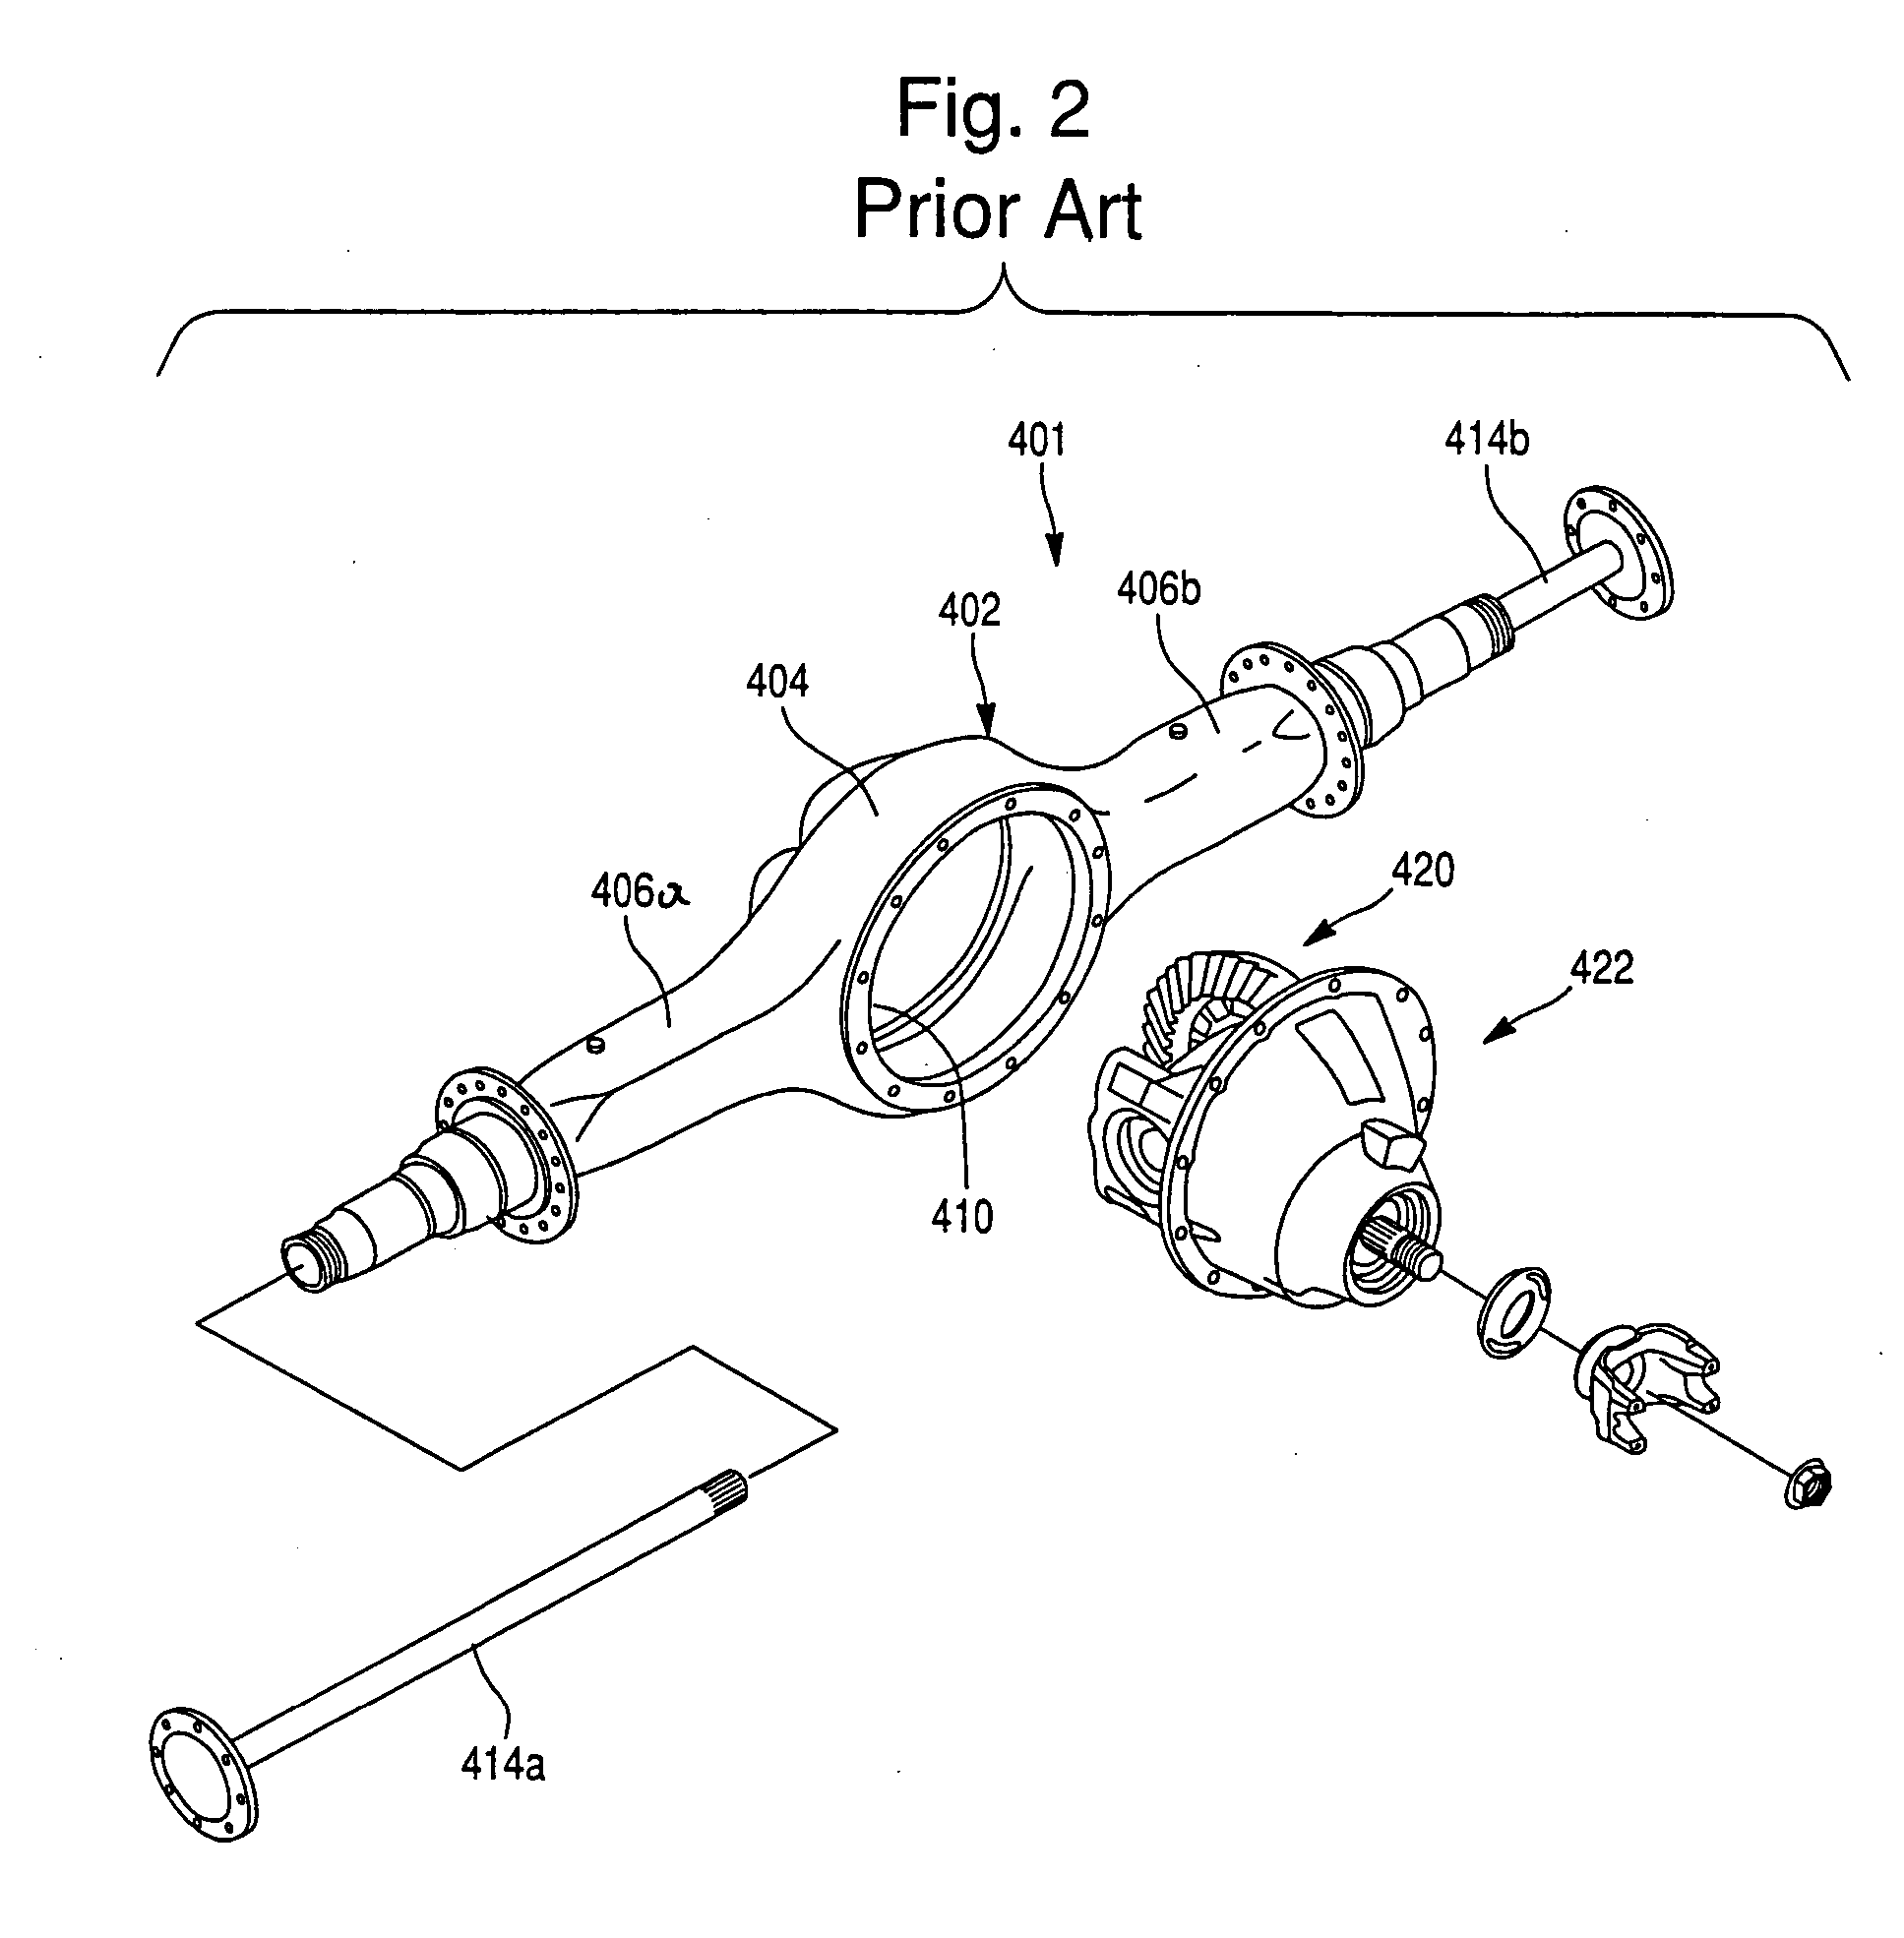 Adjustable flange device for cover member in drive axle assembly